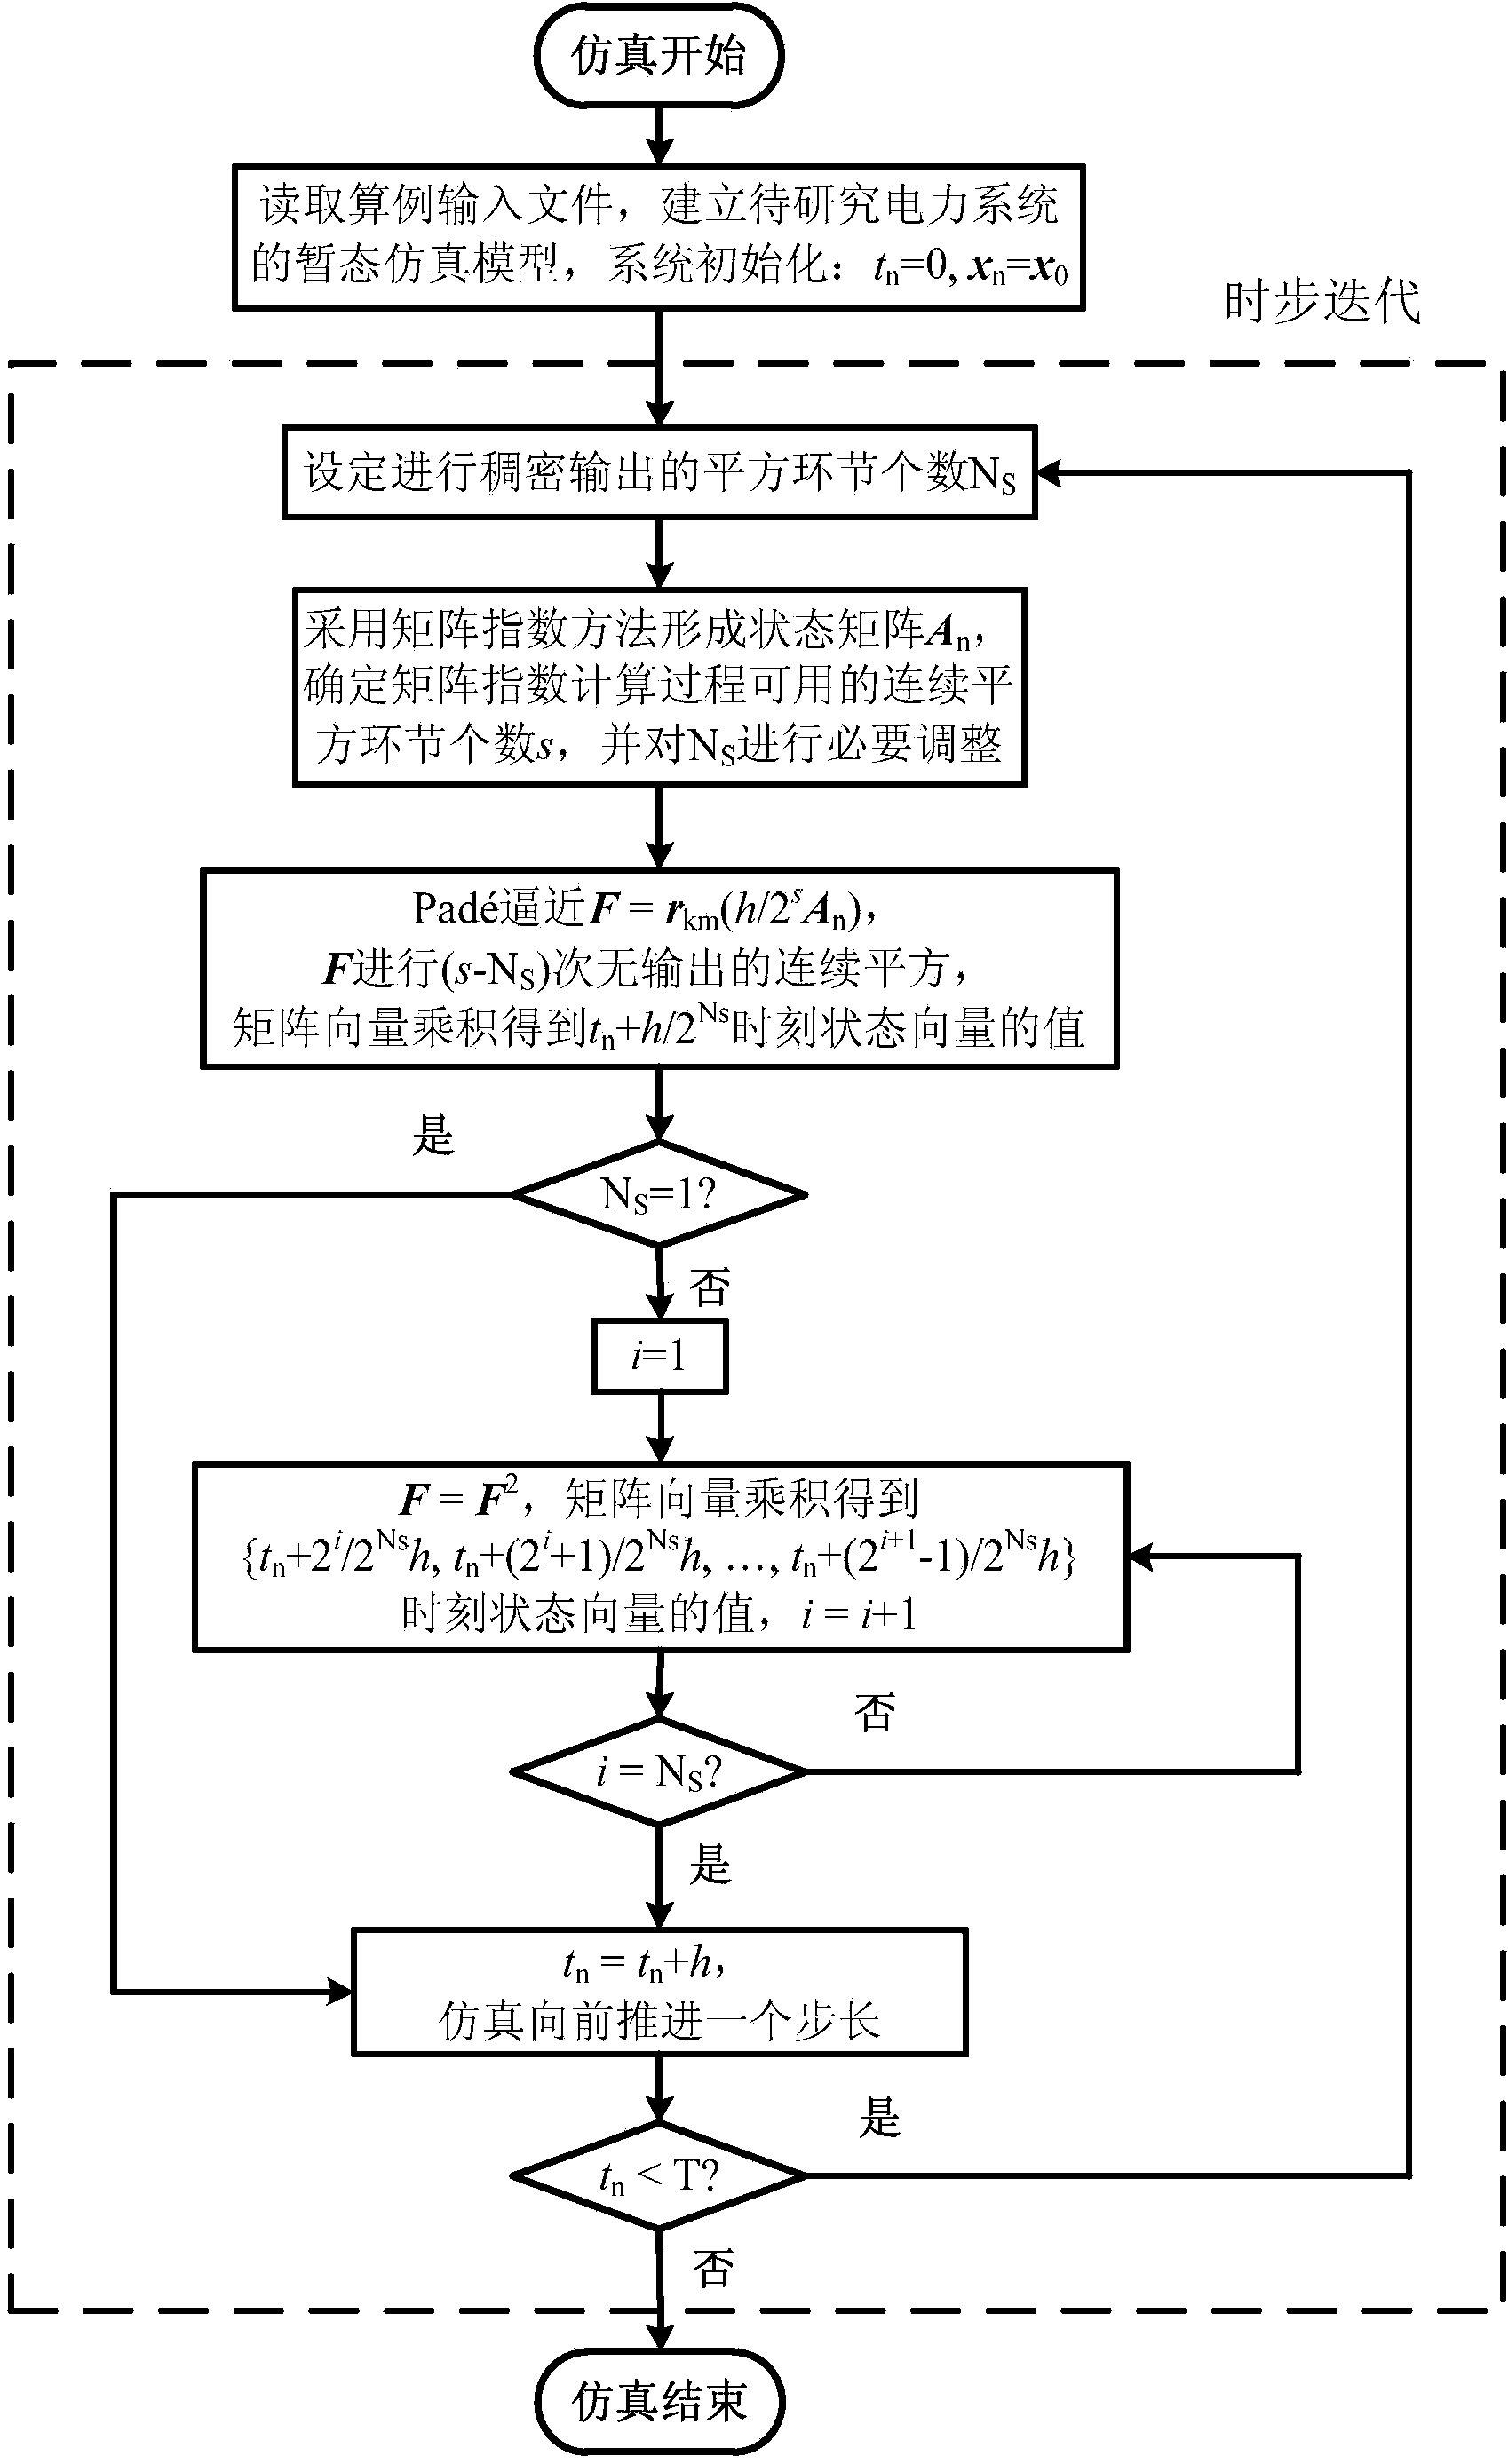 Transient simulation multi-time scale output method for matrix exponents